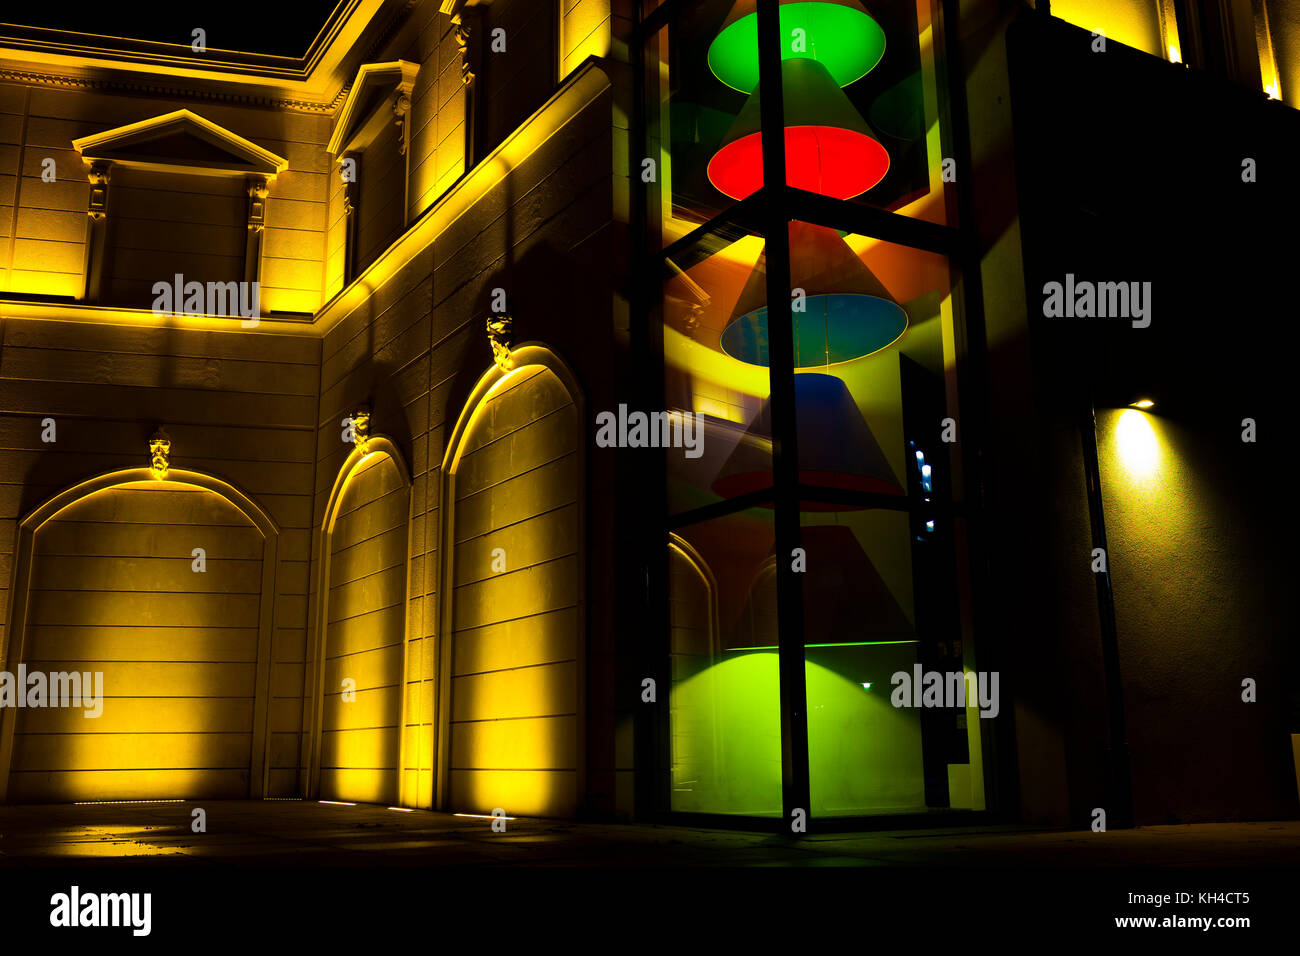 Fashion Building with brightly colored steps Lamps Stock Photo